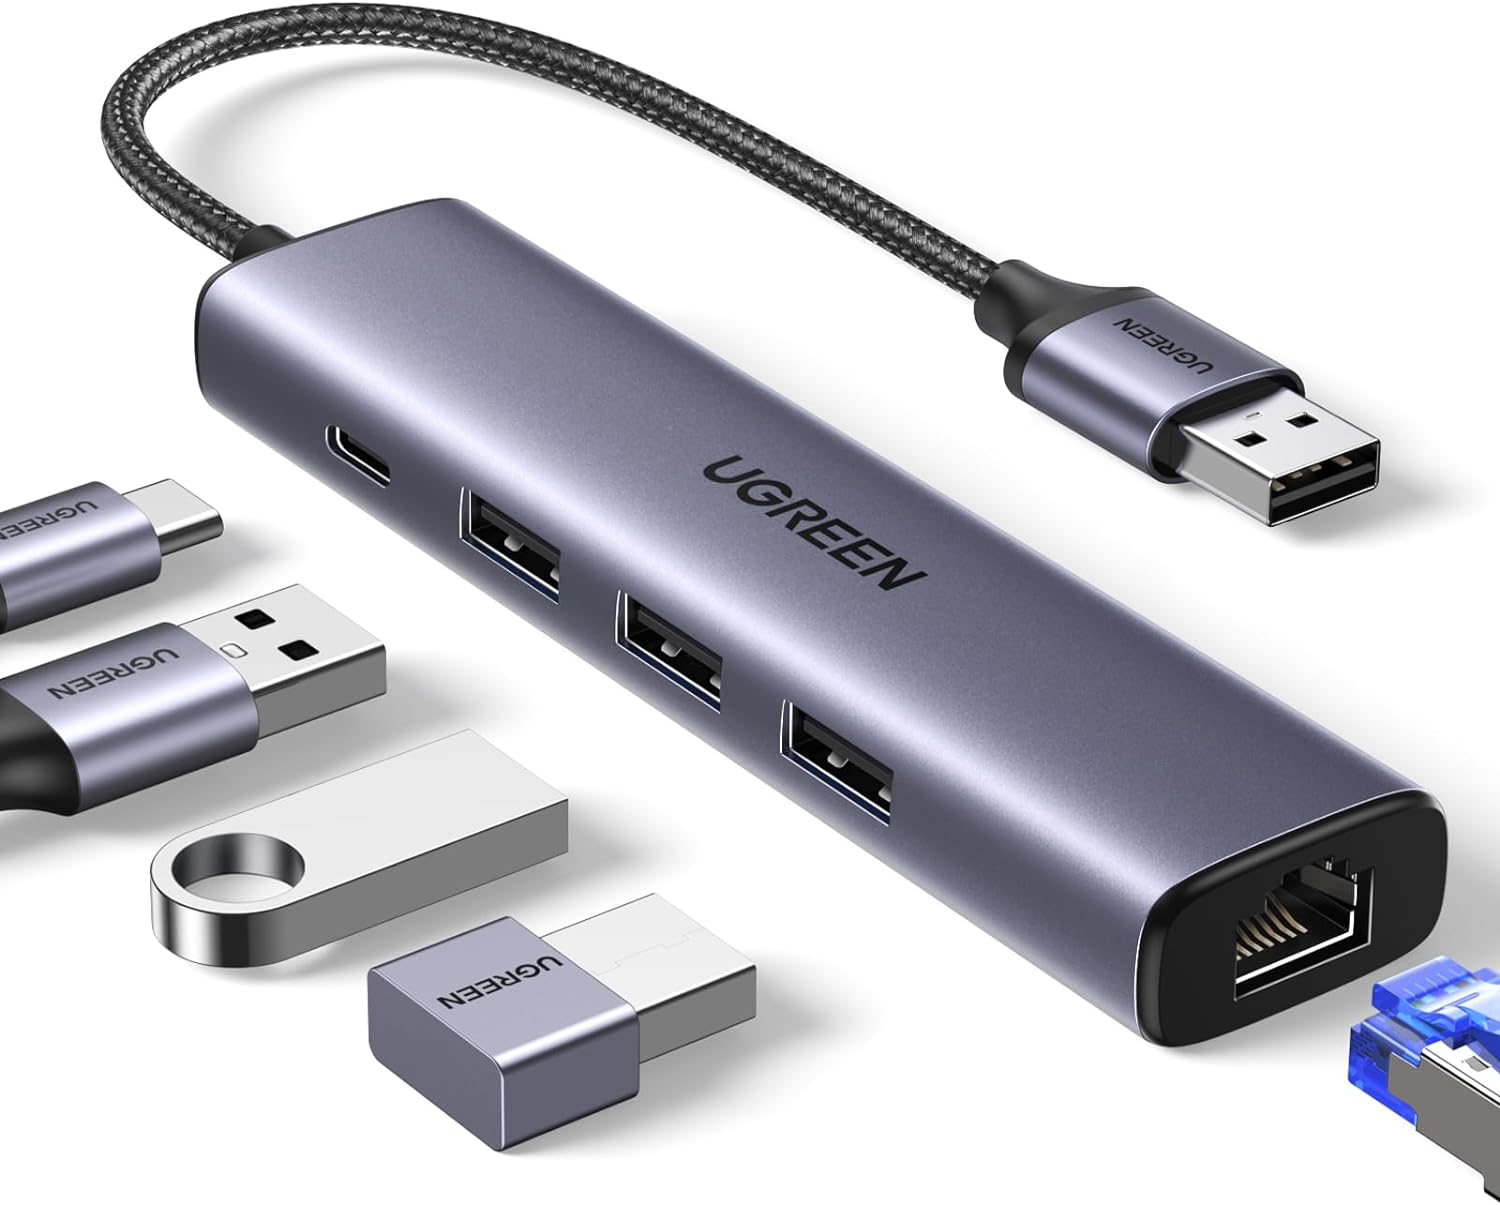 40% OFF UGREEN USB to Ethernet Adapter, 5 in 1 USB Hub with Ethernet, Plug and Play $12.05